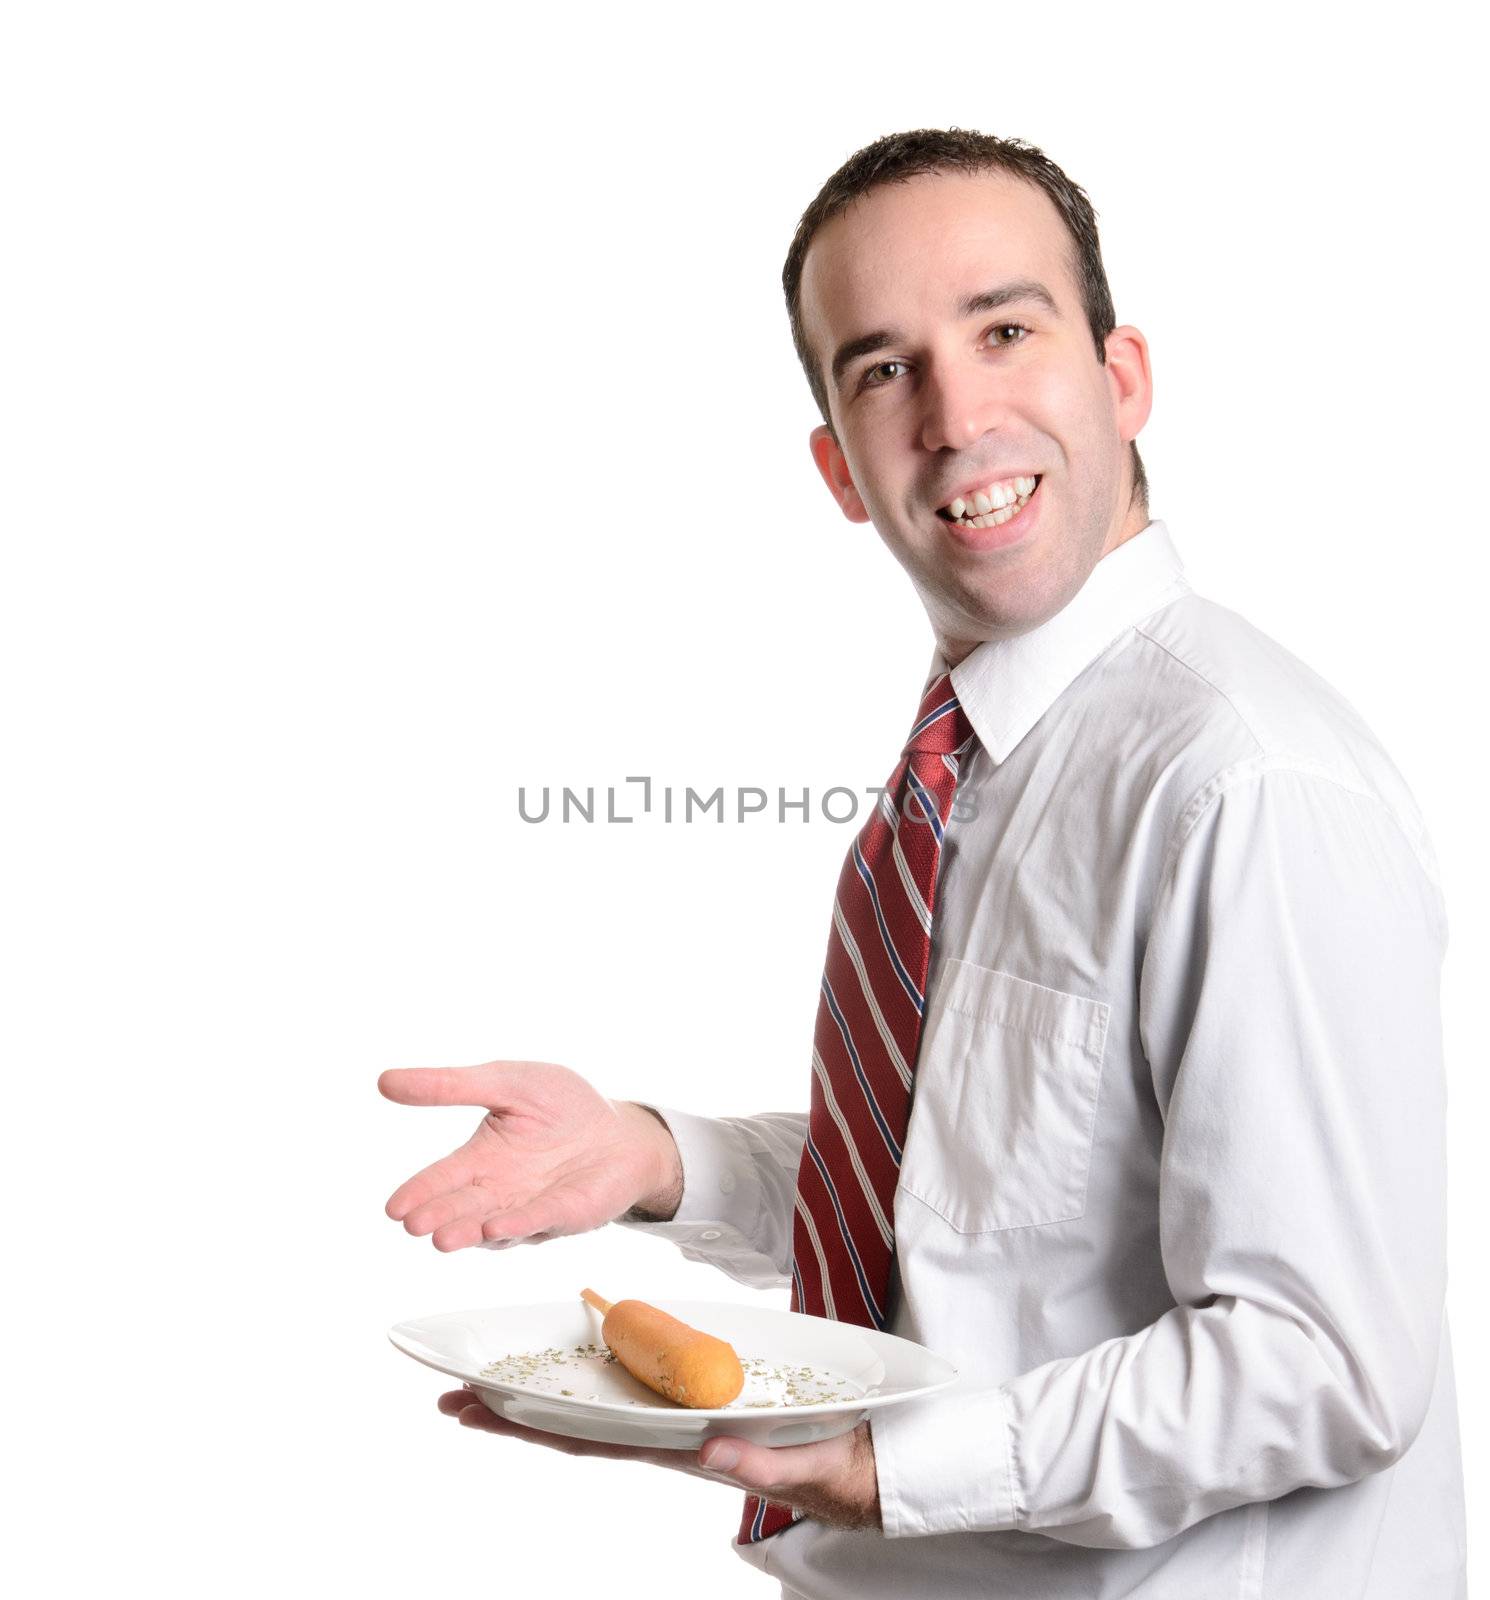 A young server is displaying a battered wiener on a plate, isolated against a white background.